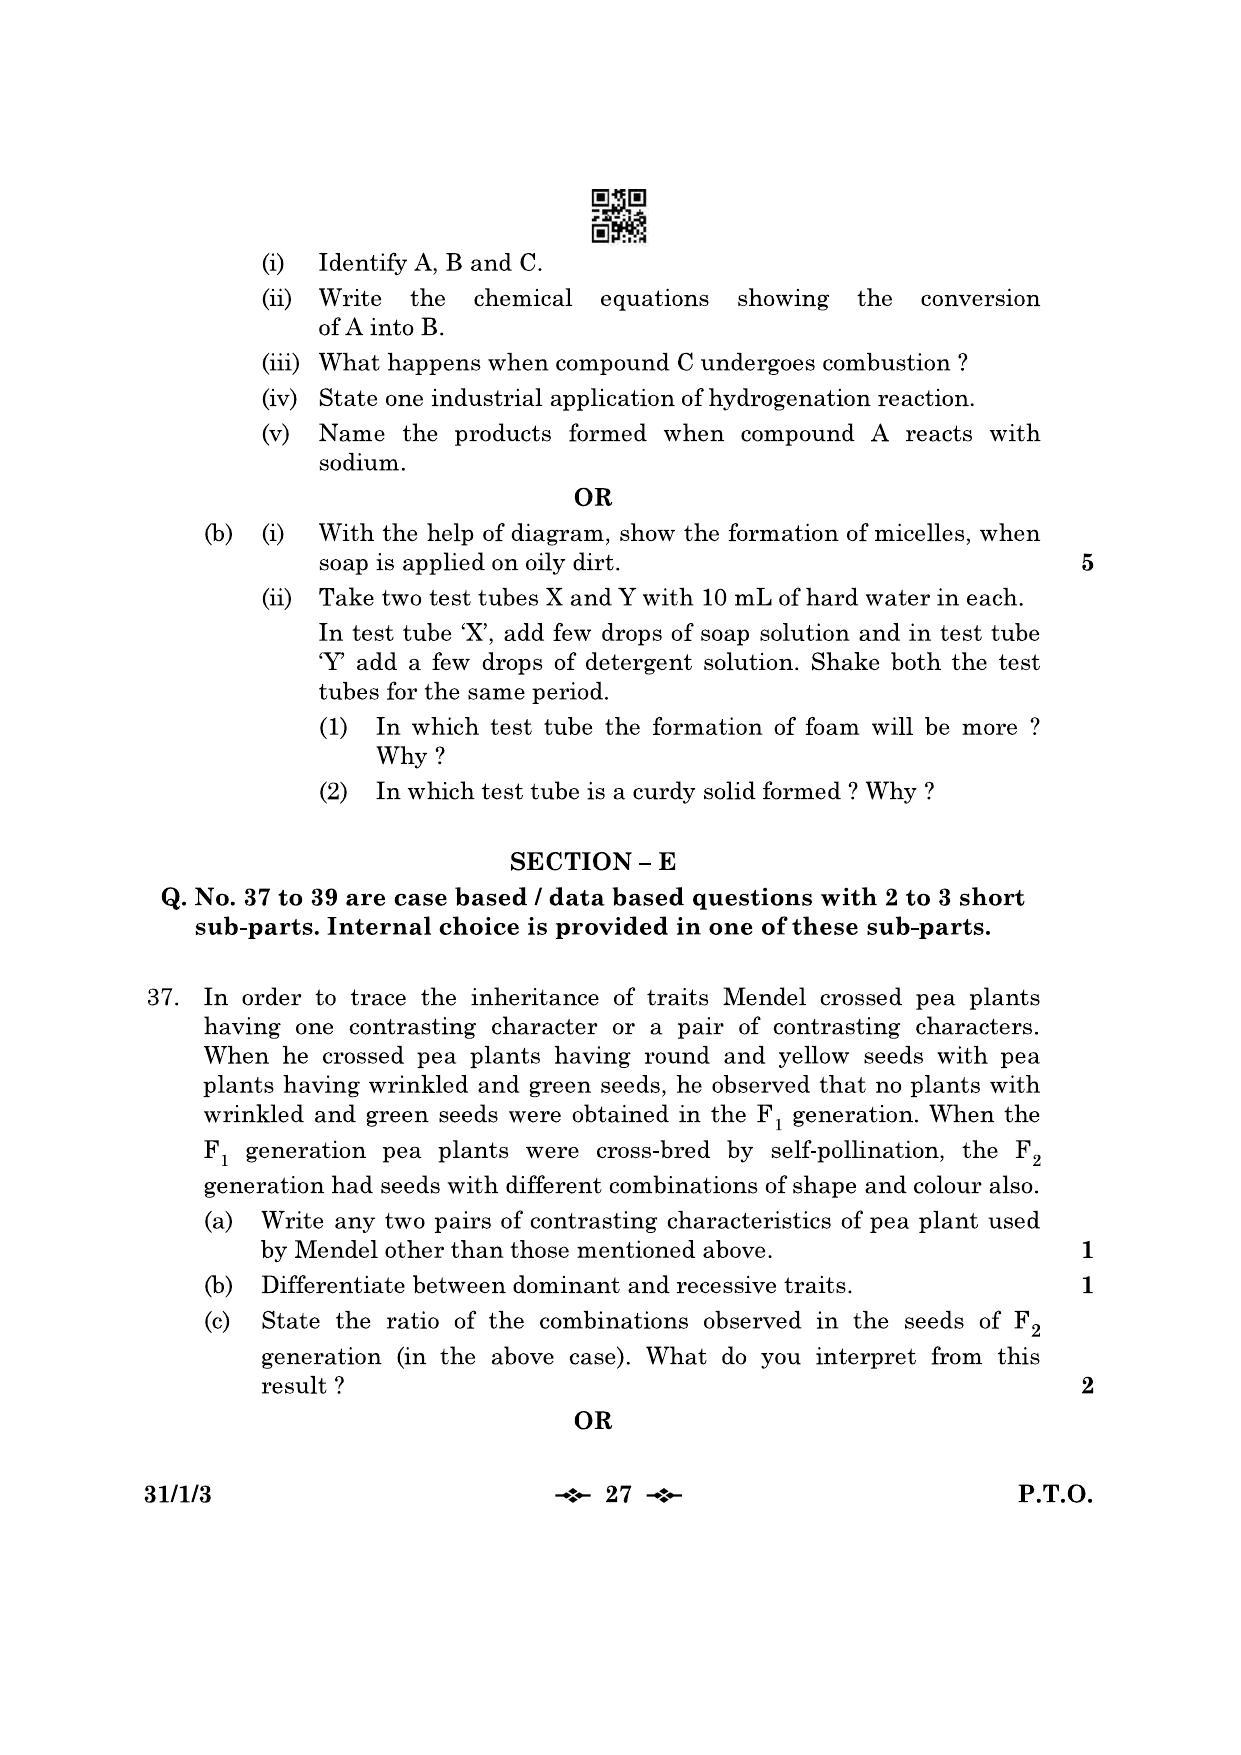 CBSE Class 10 31-1-3 Science 2023 Question Paper - Page 27